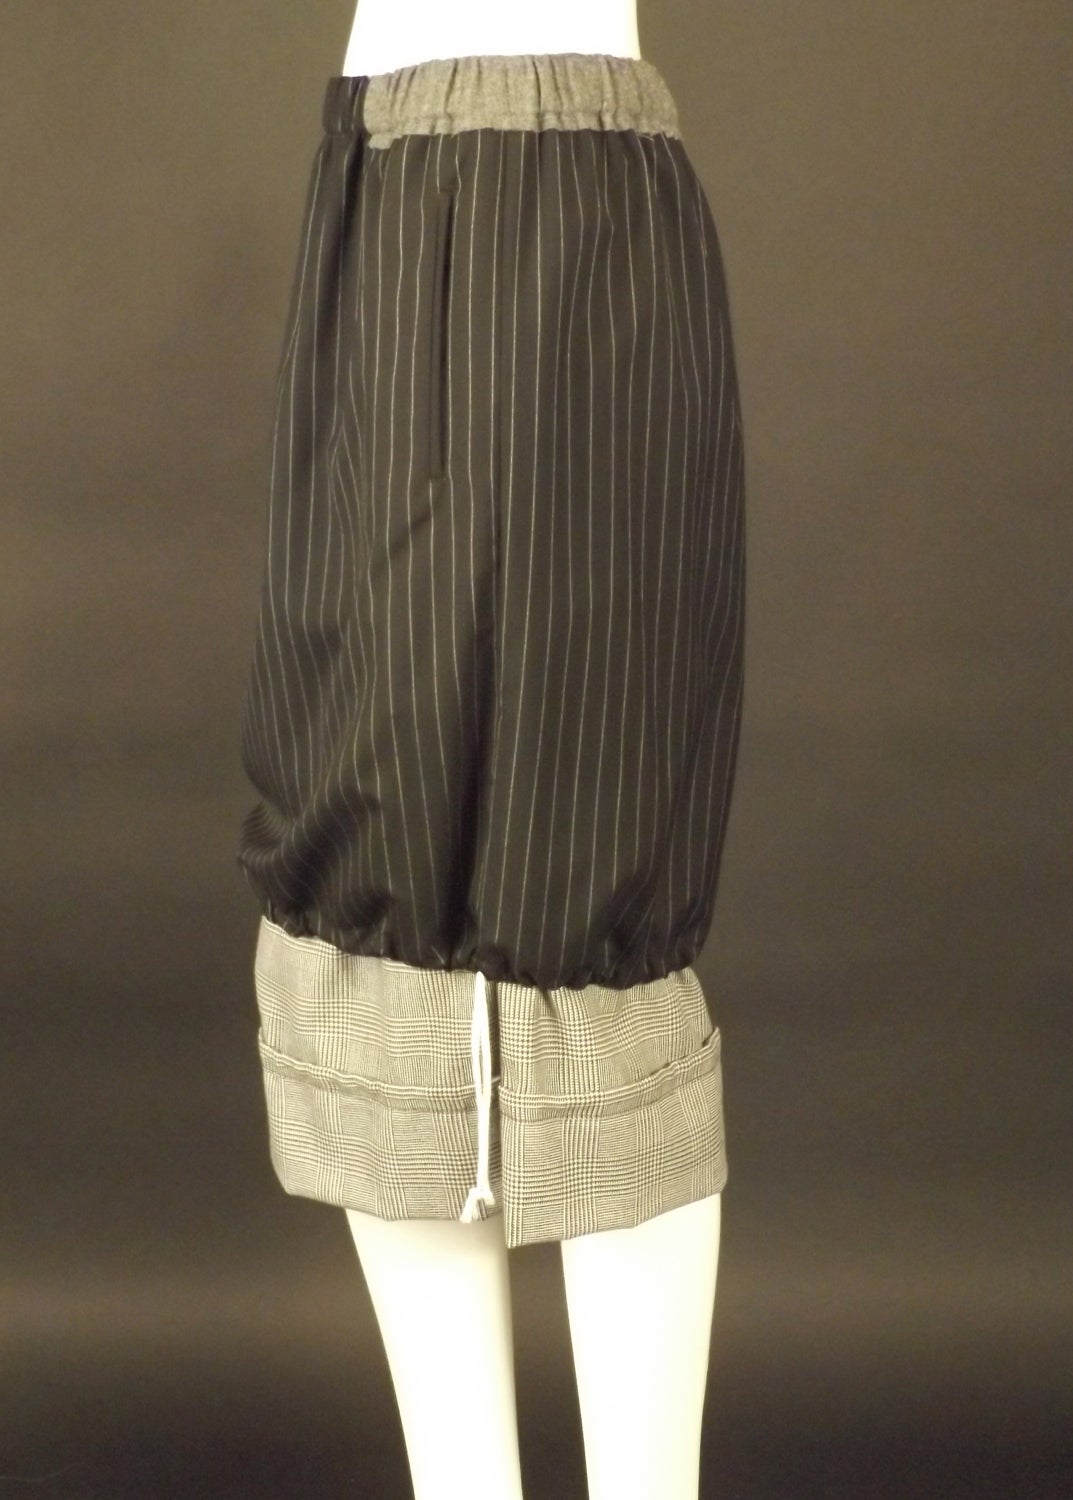 2008 Fall Collection. Fantastic skirt in contrasting wool suitings. There is a gray flannel waistband a pinstripe skirt and a black and white houndstooth plaid under skirt. The waistband is made of an elastic casing. Drawstring ties at the hems of